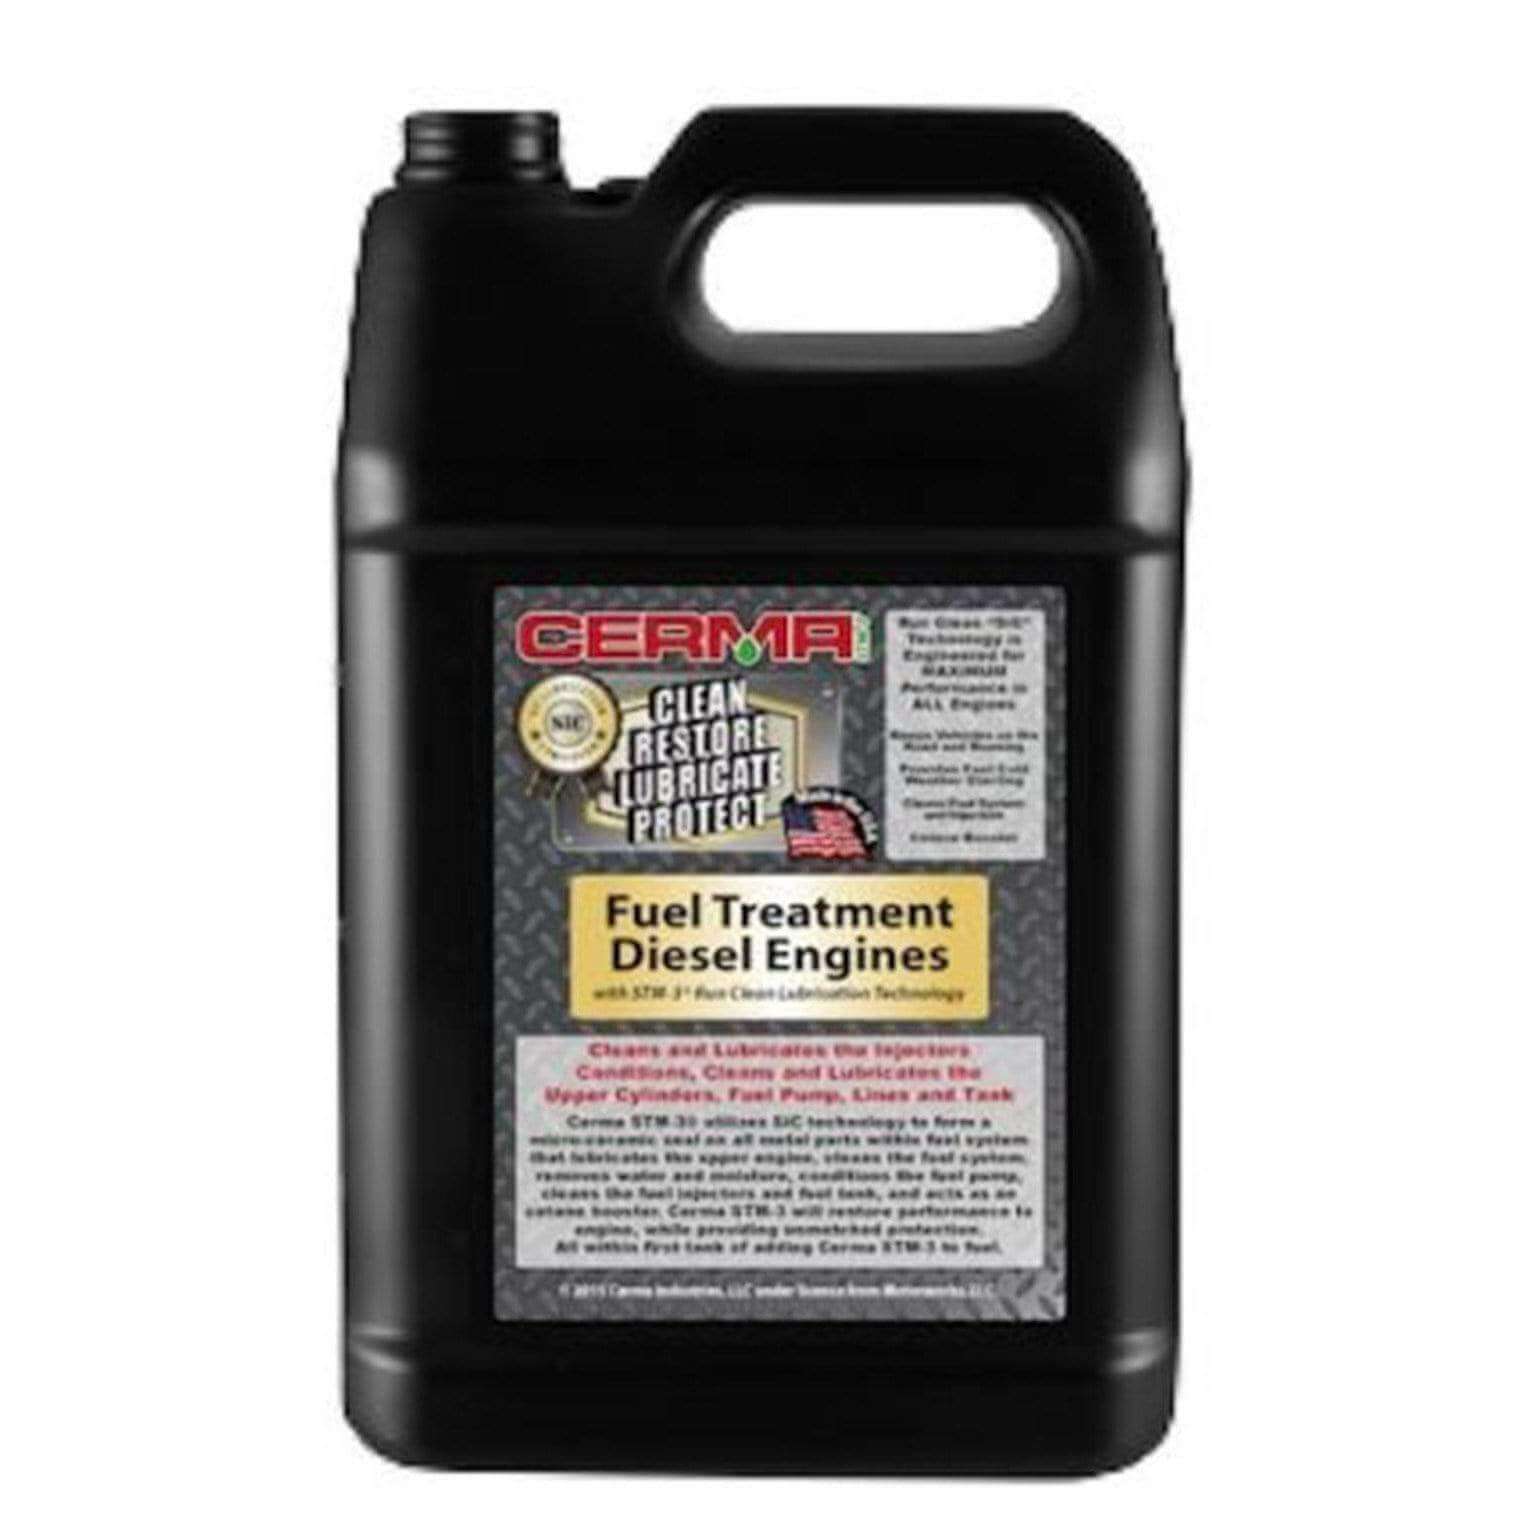 Cerma Ceramic Fuel Treatment for Diesel Engines at $369.77 only from cermatreatment.com